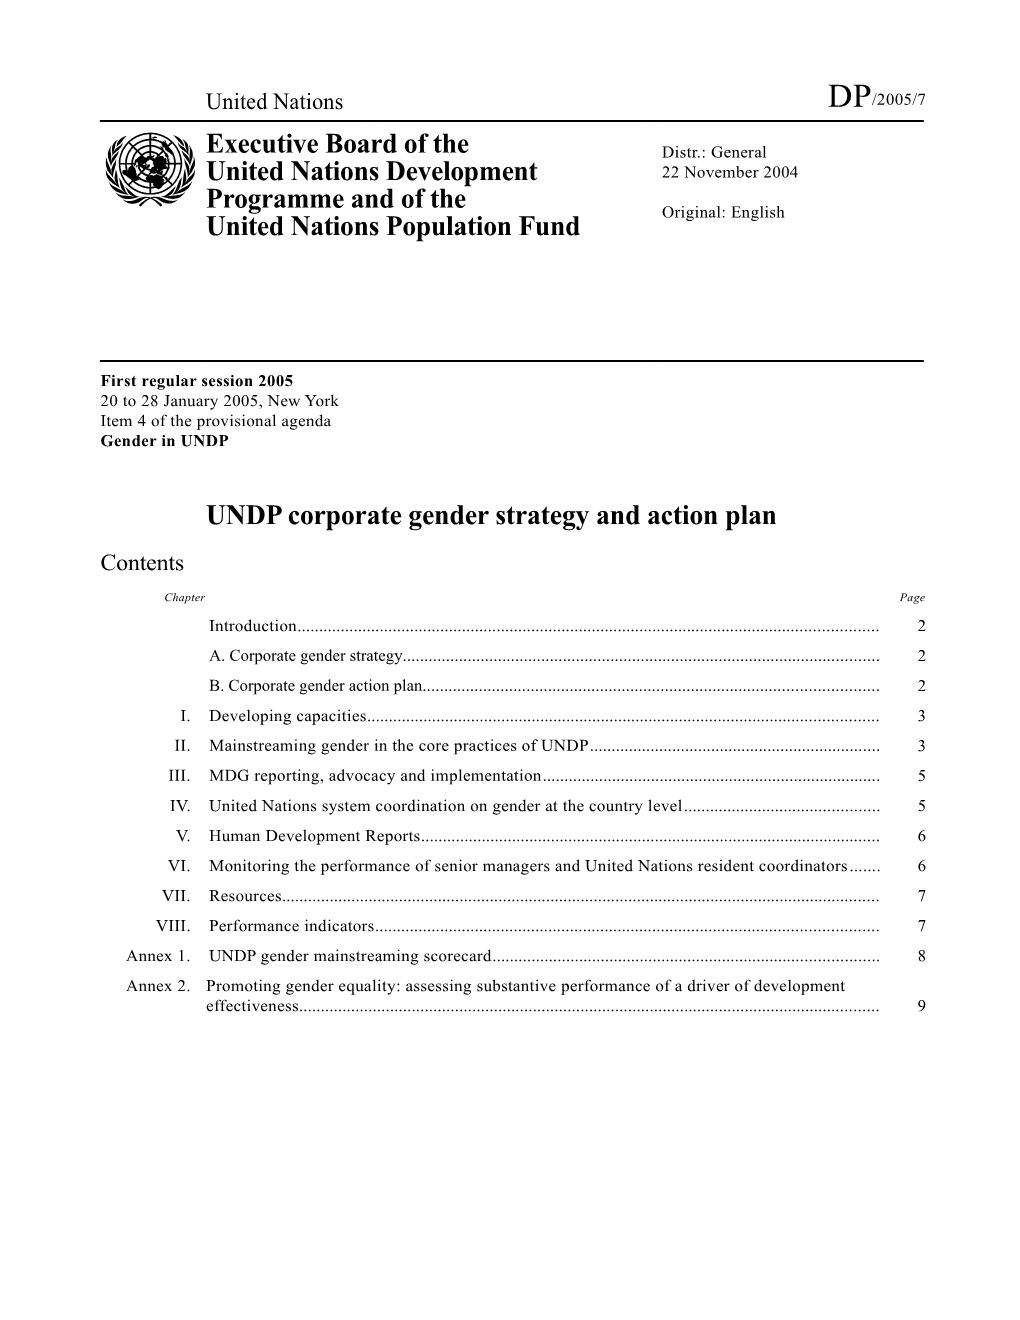 UNDP Corporate Gender Strategy and Action Plan